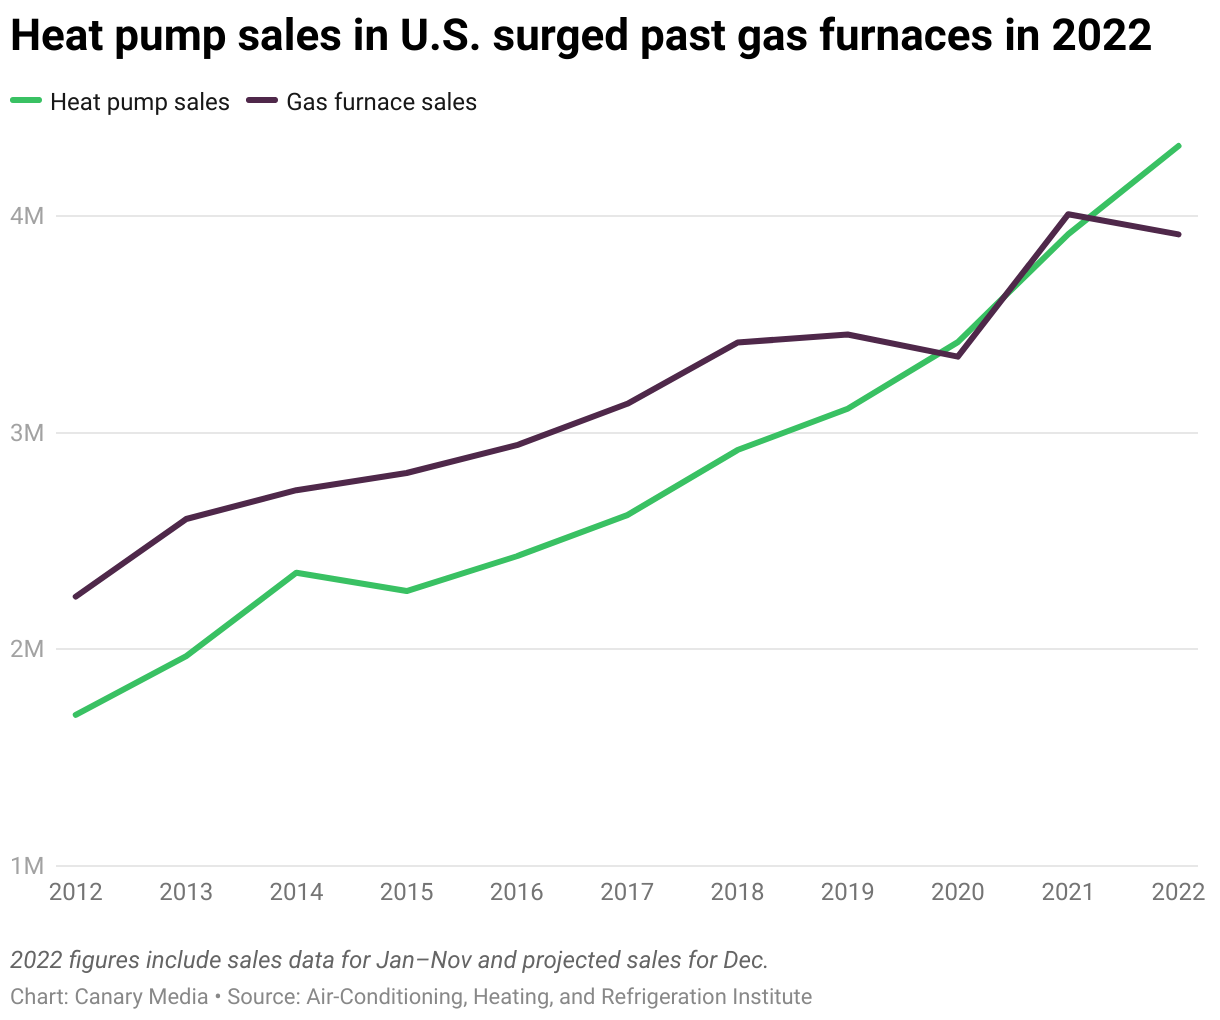 canary-mediaheat-pump-sales-in-u.s.-surged-past-gas-furnaces-in-2022 (1)